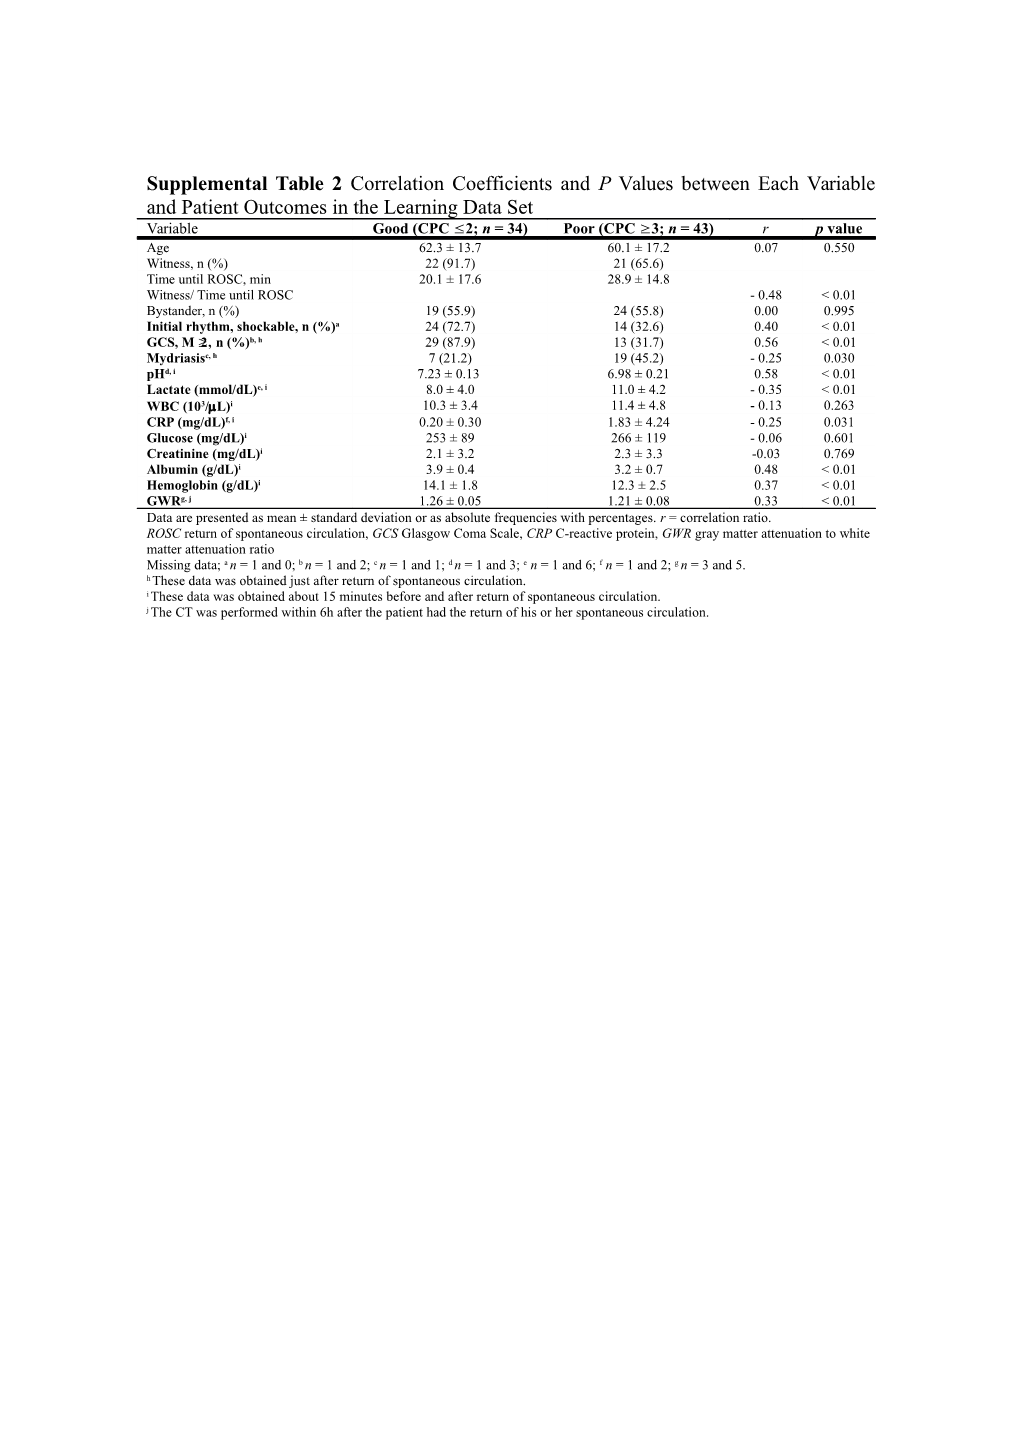 Supplemental Table 2 Correlation Coefficients and P Values Between Each Variable and Patient